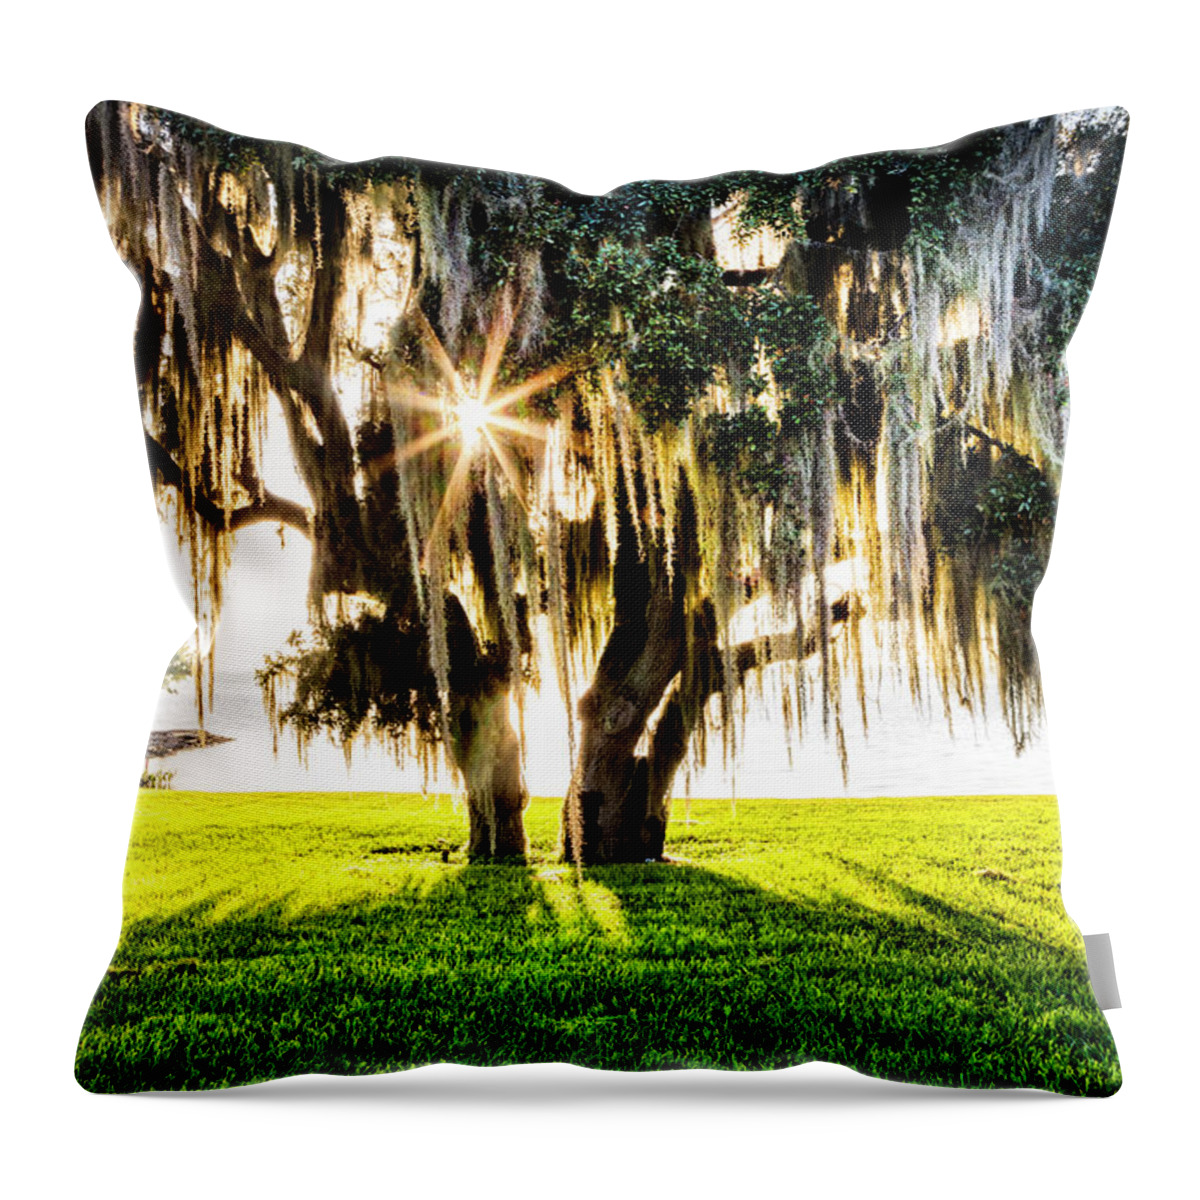 Clouds Throw Pillow featuring the photograph Sun and Shadows by Debra and Dave Vanderlaan